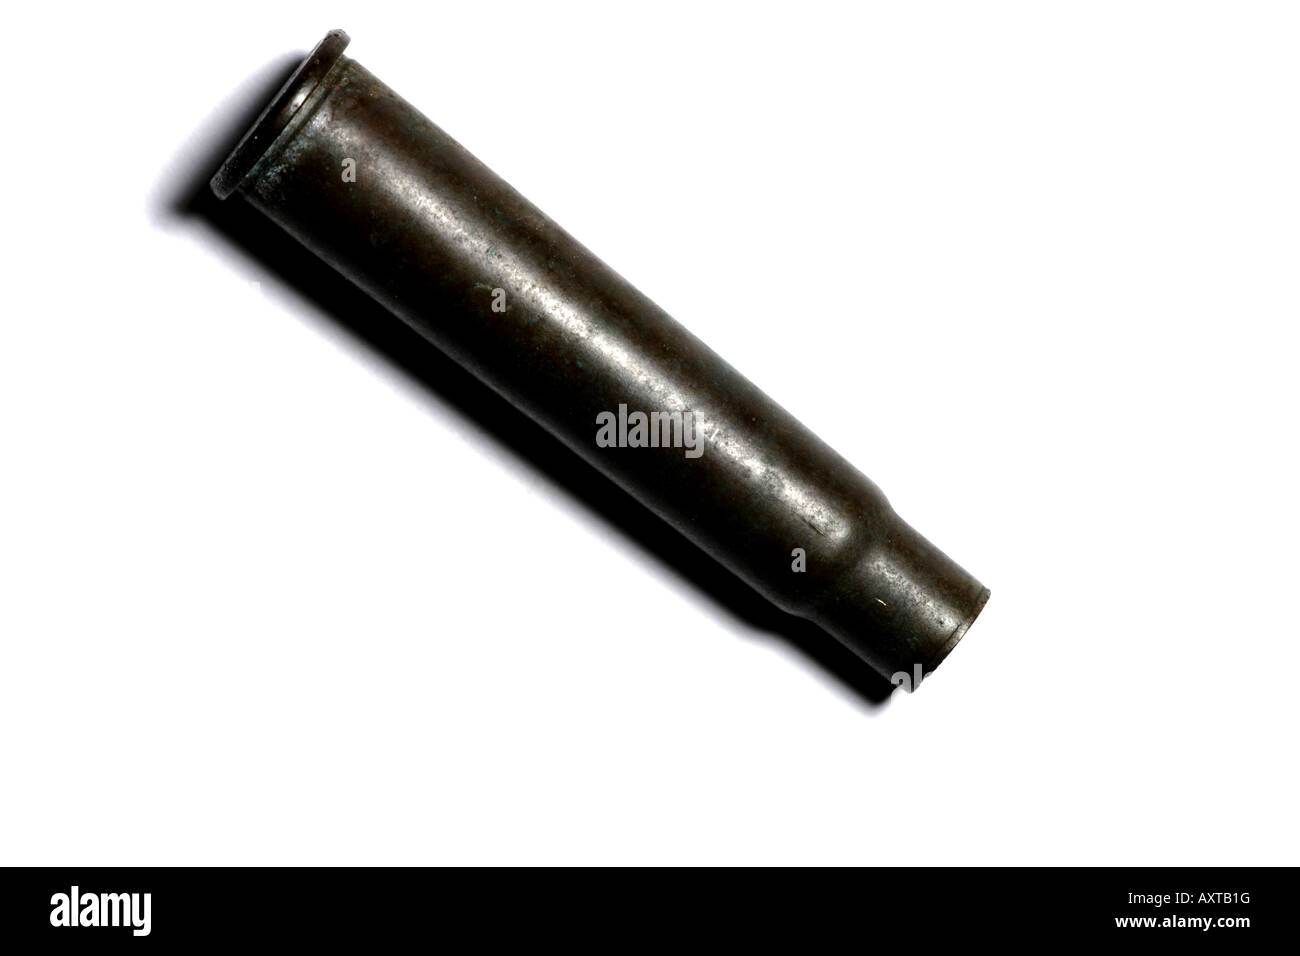 'CORRODED BULLET CASING' Stock Photo